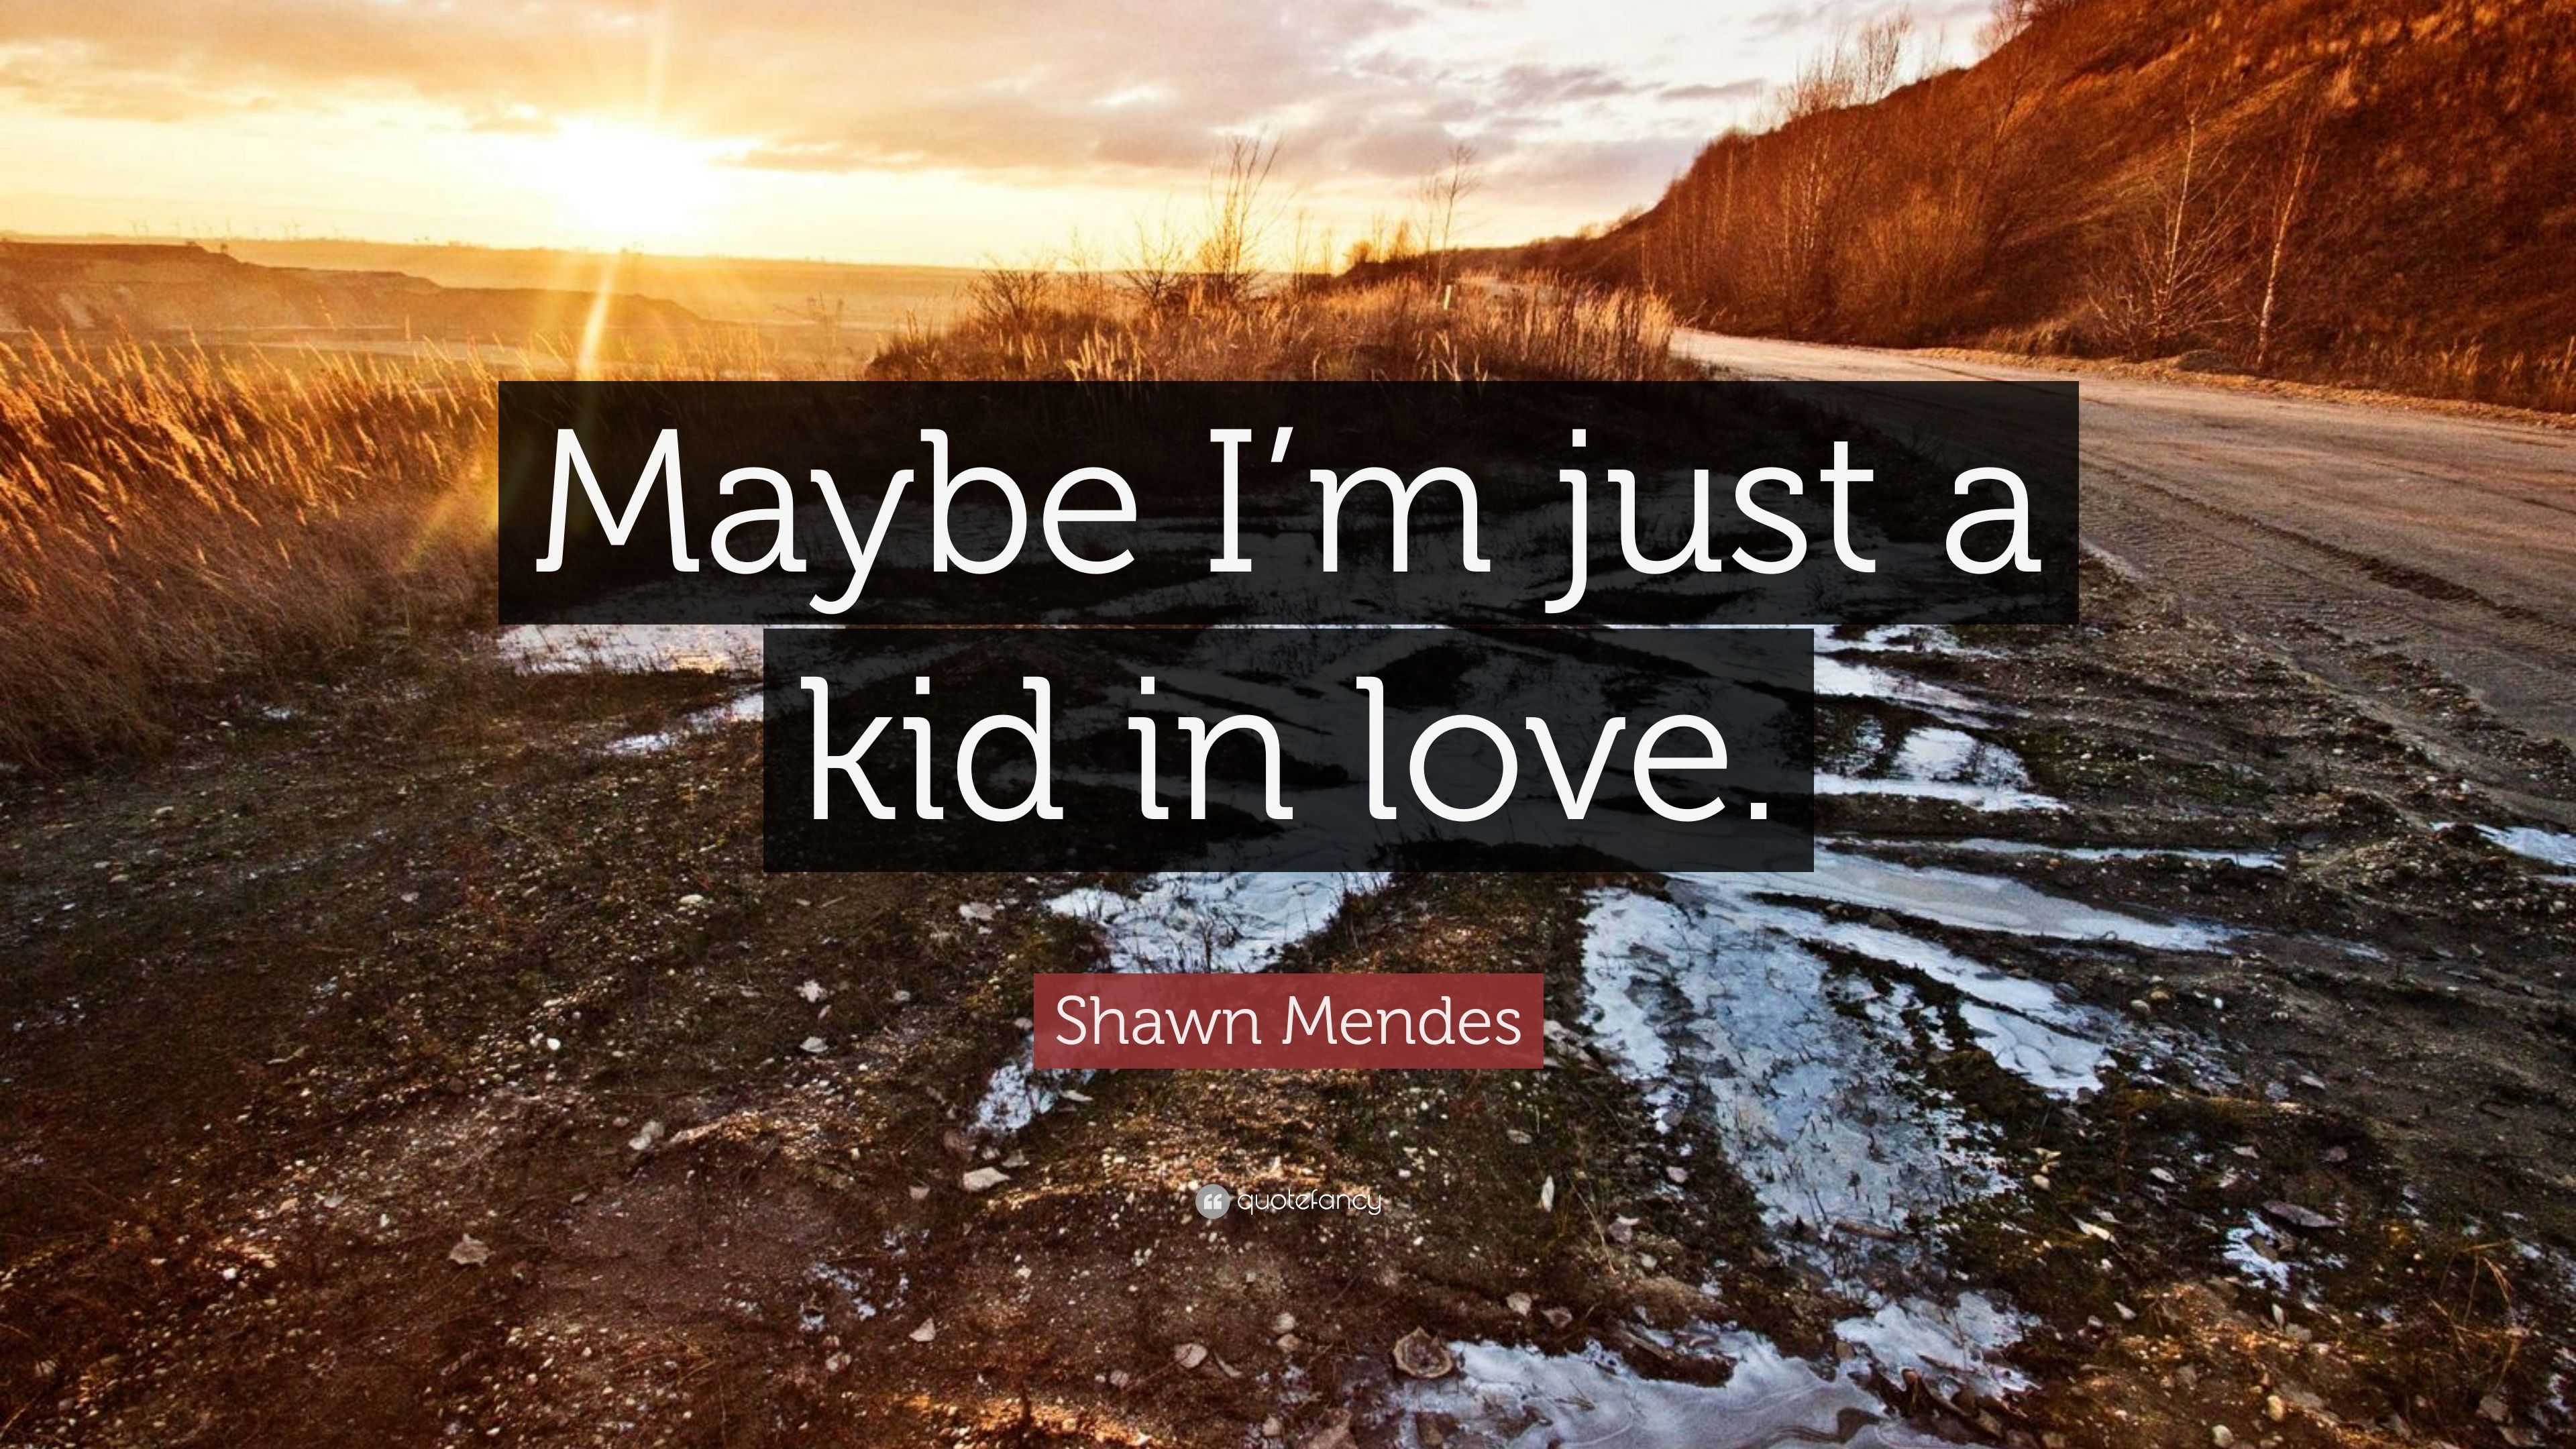 Shawn Mendes Quote: “Maybe I'm just a kid in love.” (12 wallpaper)